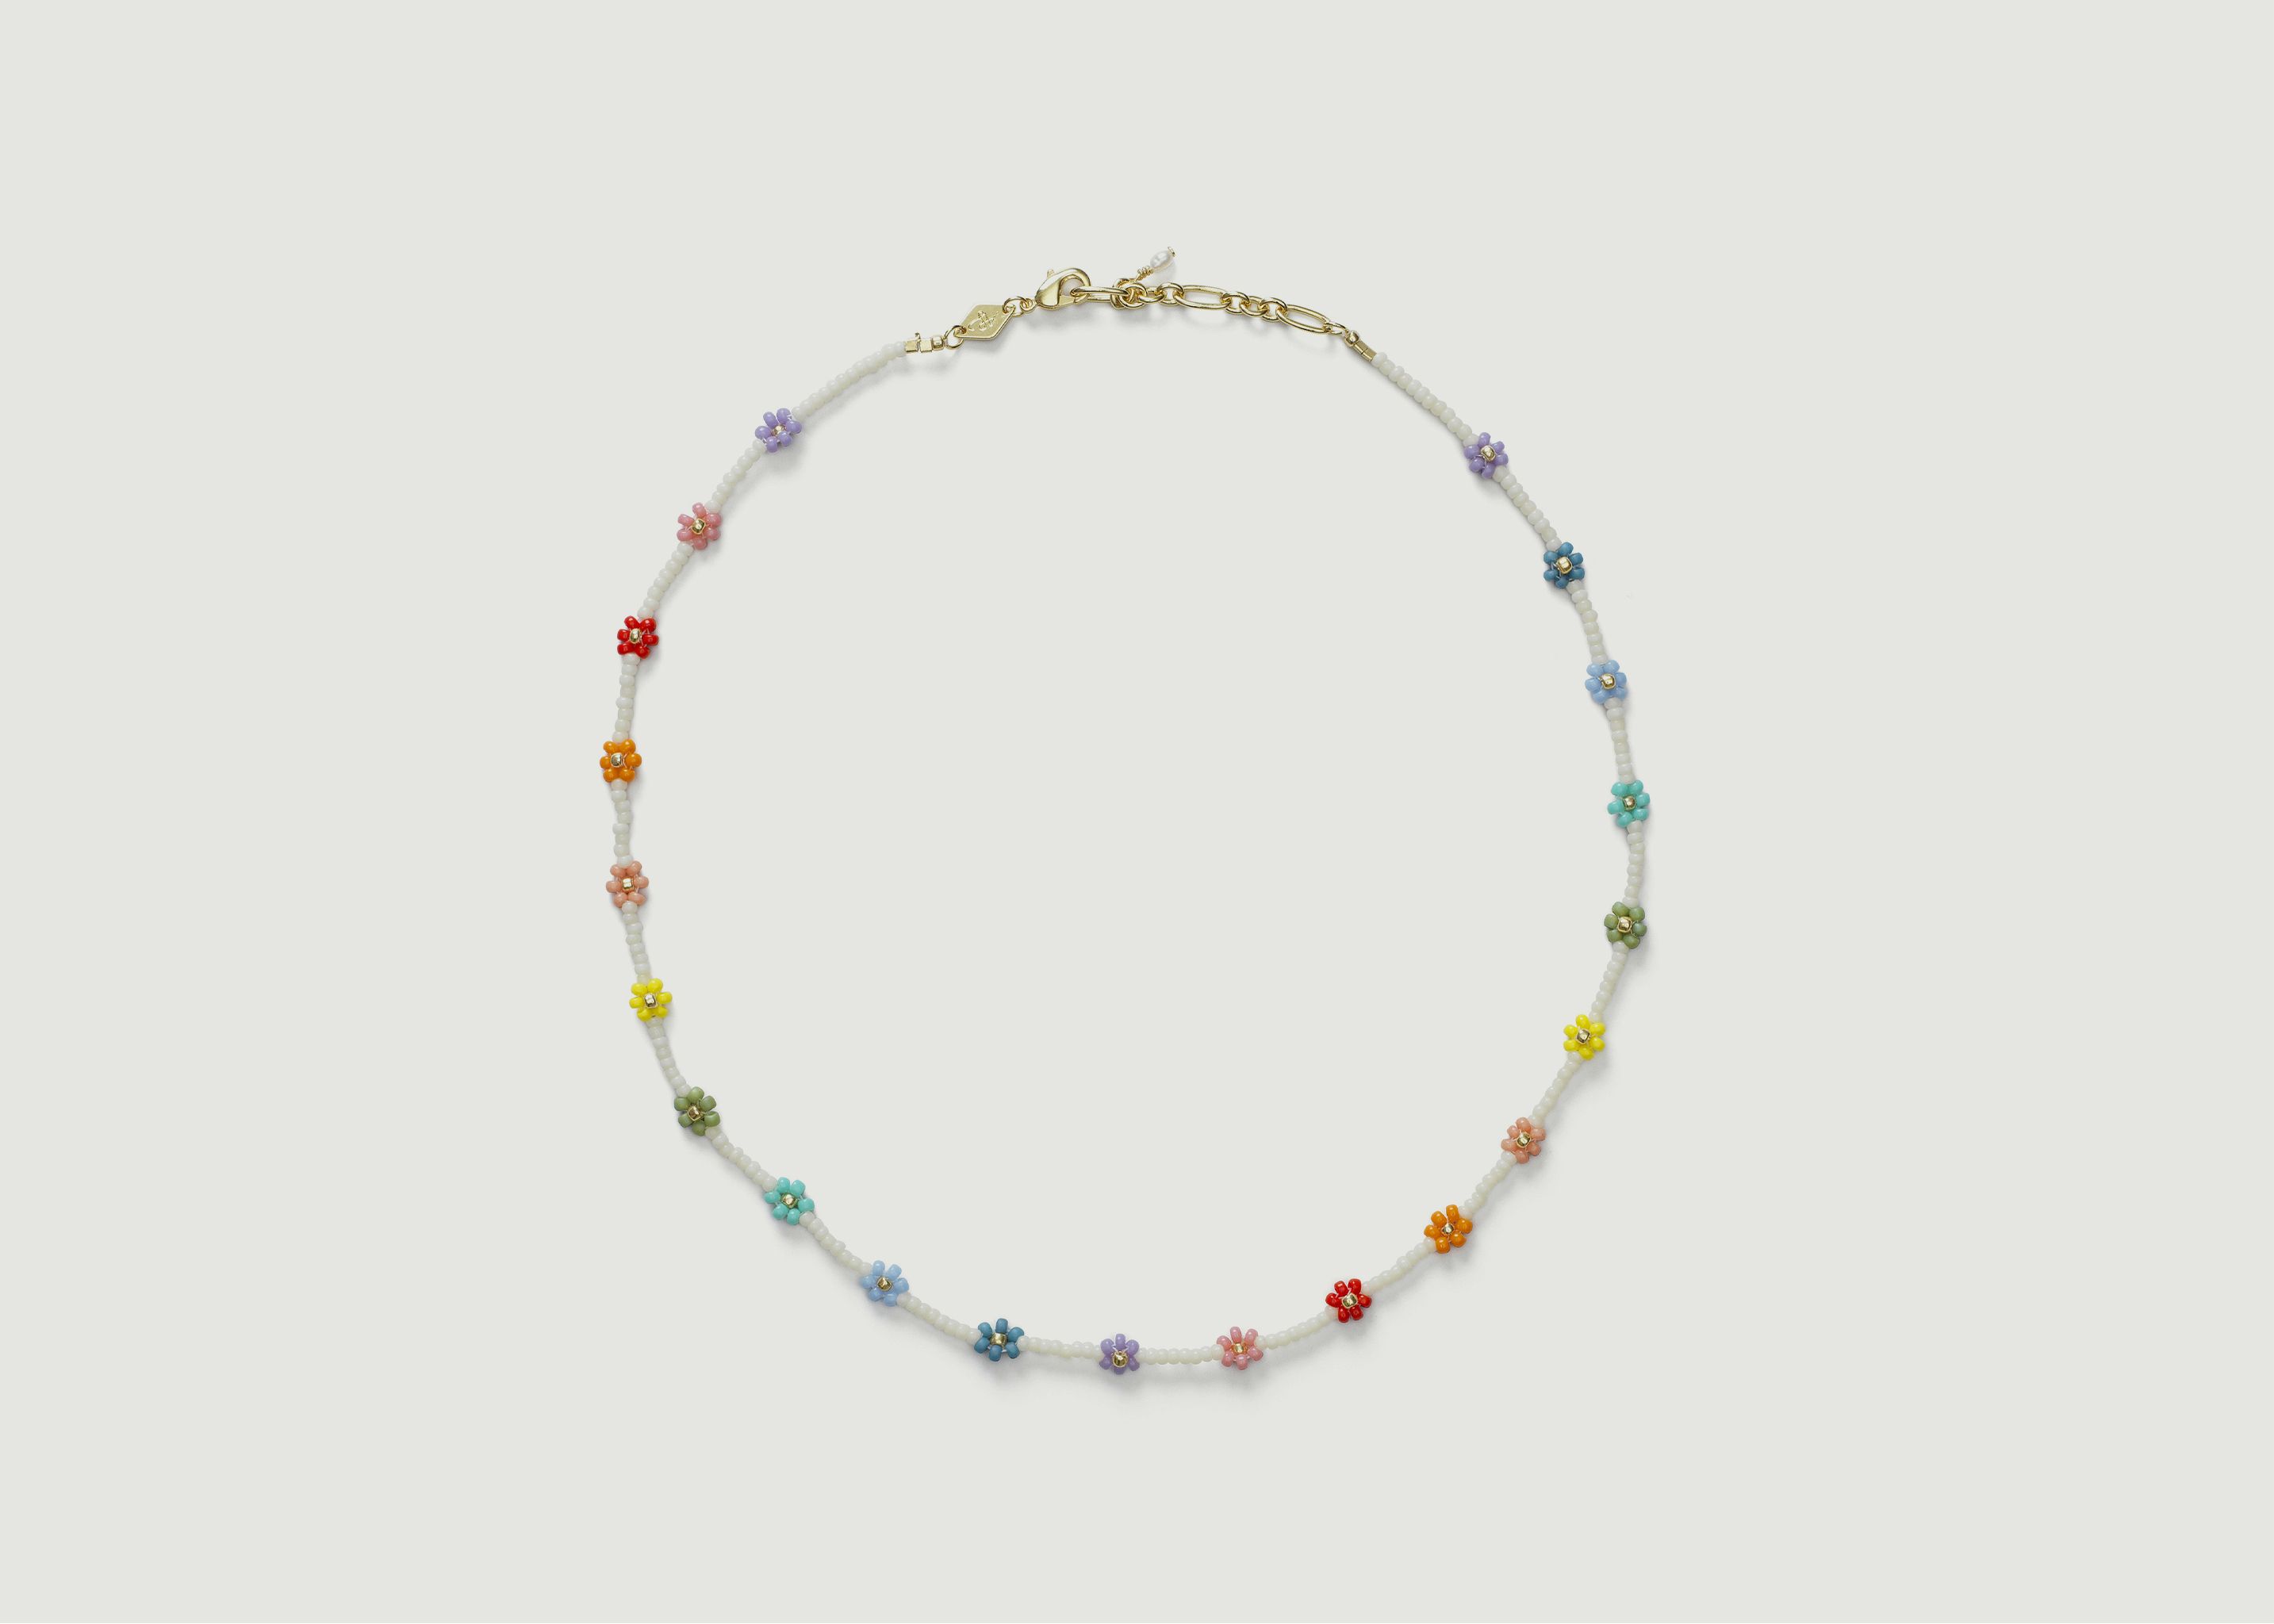 Necklace with Flower Power beads - Anni Lu